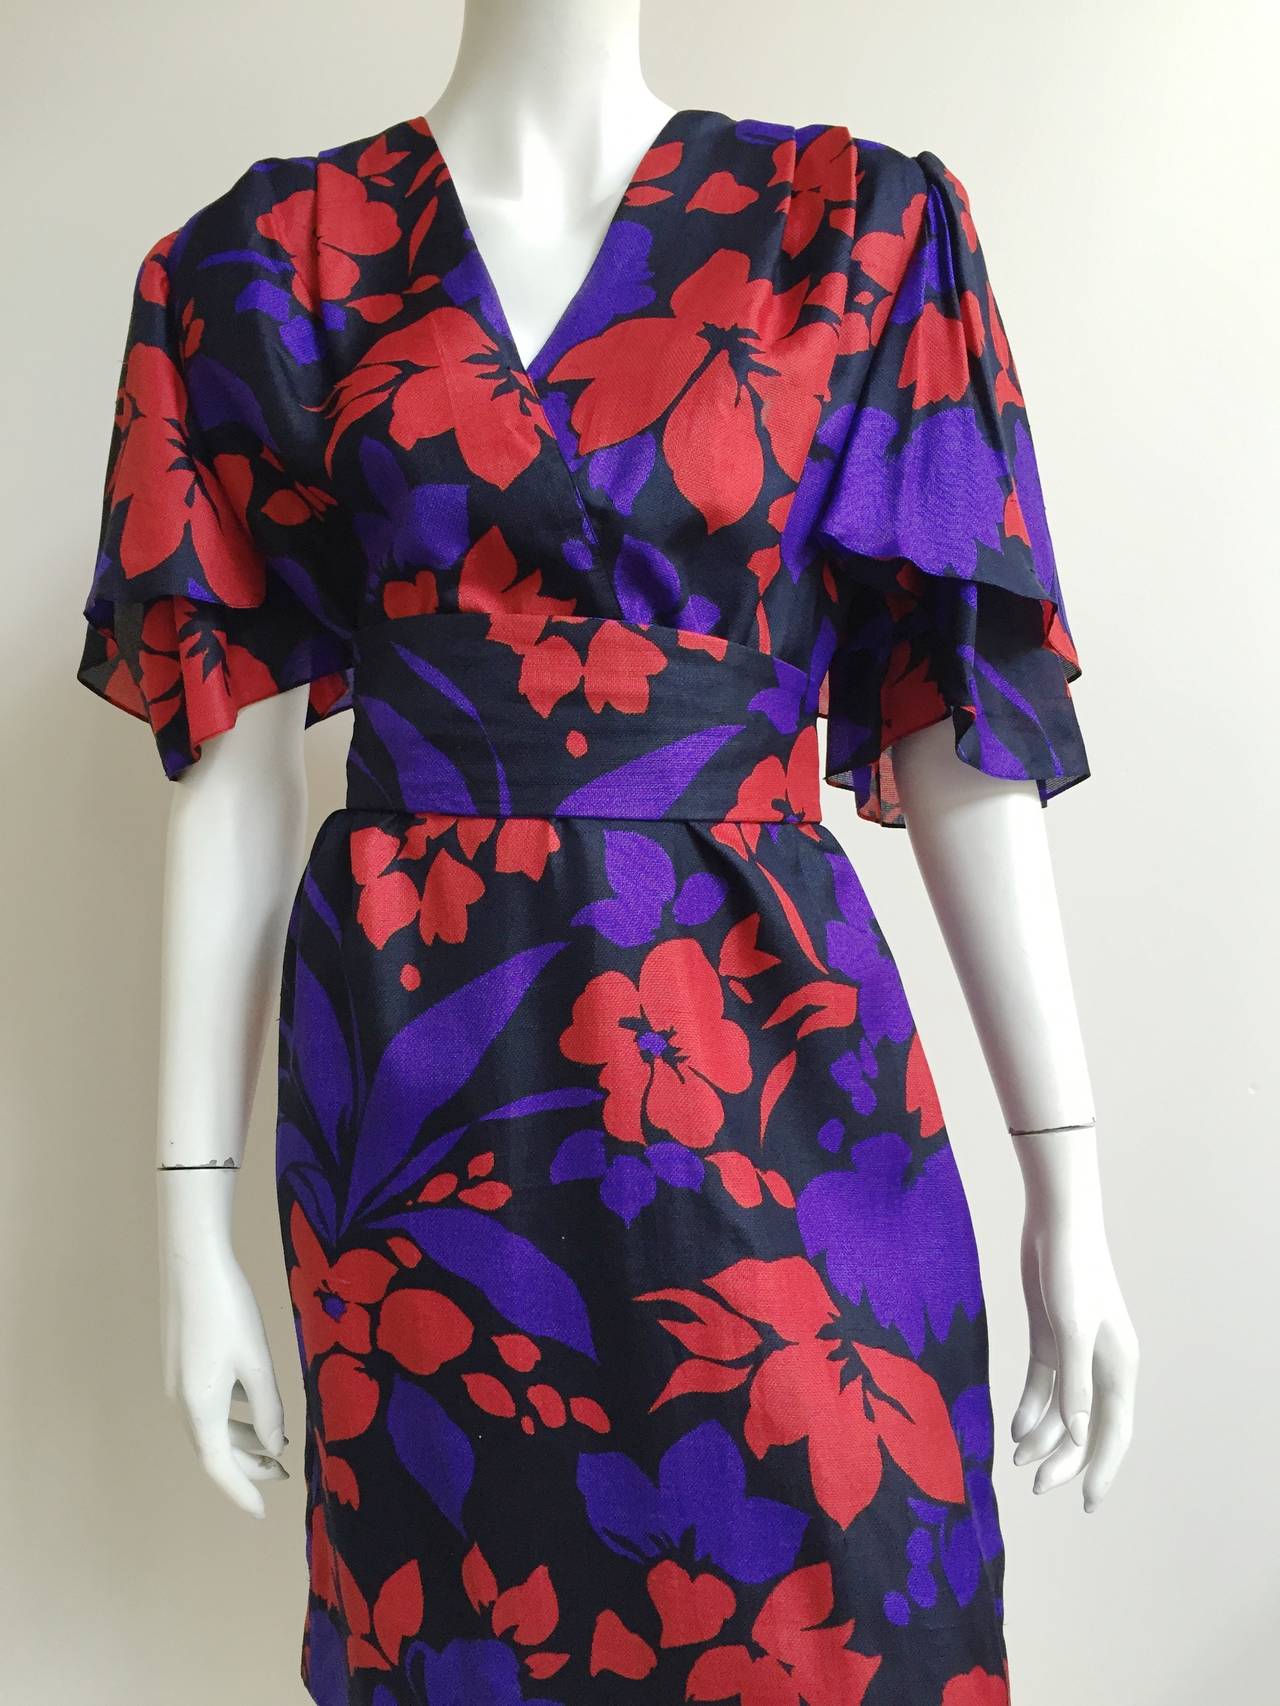 Givenchy Nouvelle Boutique early 1980s flower pattern dress with sash belt fits a size 12 but please see & use measurements. Layered sleeves and vibrant color palette makes this one eye catching dress.  Zipper on side.
Measurements are:
40